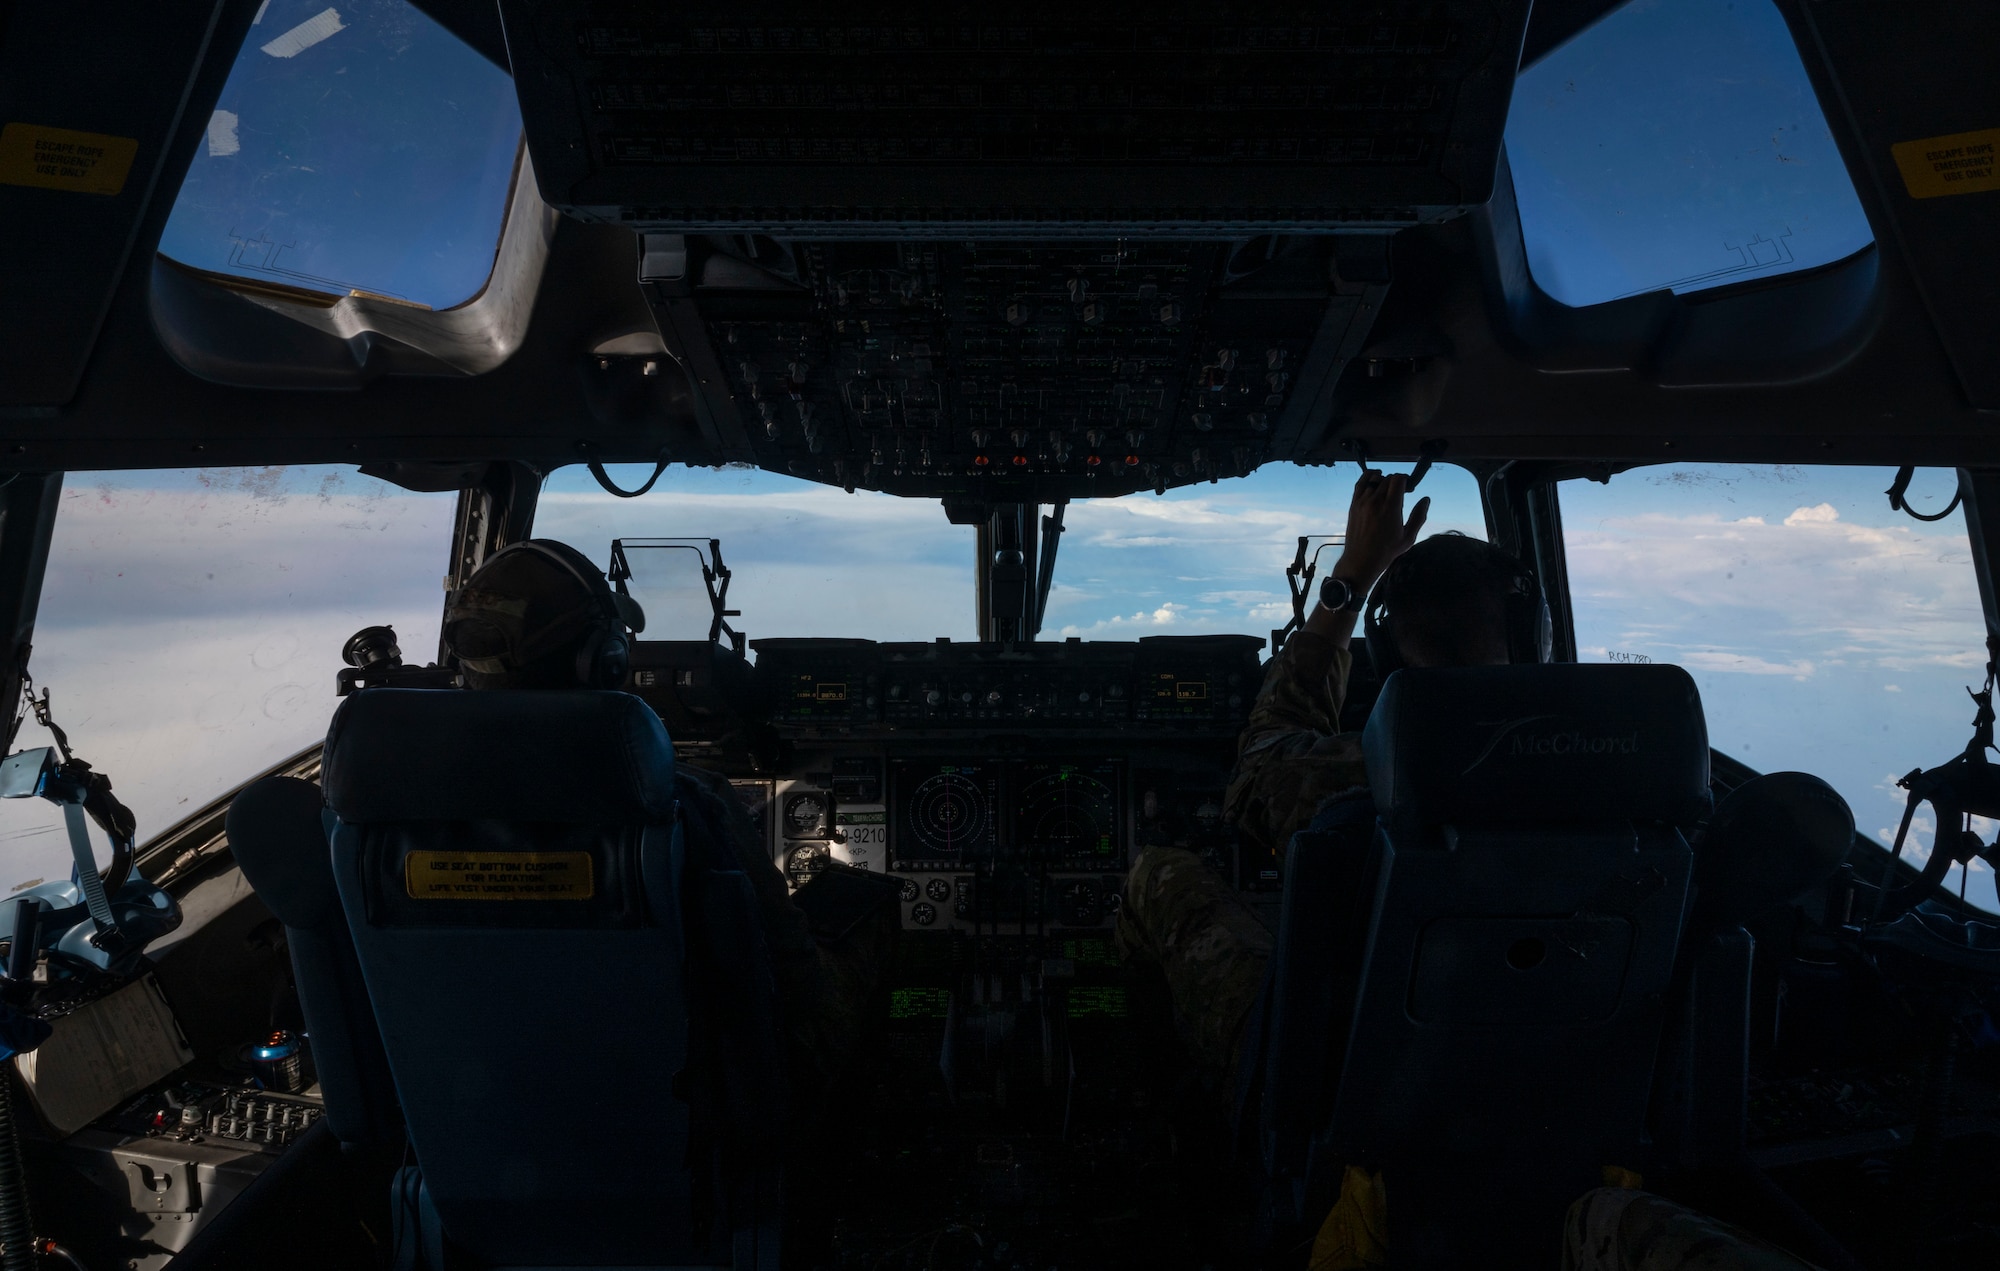 U.S. Air Force 1st Lt. Dylan Bishop, left, a co-pilot with the 7th Airlift Squadron, and U.S. Air Force Maj. John Greenway, a pilot with the 7th AS, fly a C-17 Globemaster III over the Pacific Ocean during Exercise Rainier War 21B, Nov. 5, 2021. Rainier War 21B exercised and evaluated the 62nd Airlift Wing’s ability to employ the force and their ability to perform during wartime and contingency taskings in a high-intensity, wartime contested, degraded and operationally limited environment while supporting the contingency operations against a near-peer adversary in the U.S. Indo-Pacific Command area of responsibility. (U.S. Air Force photo by Staff Sgt. Rachel Williams)